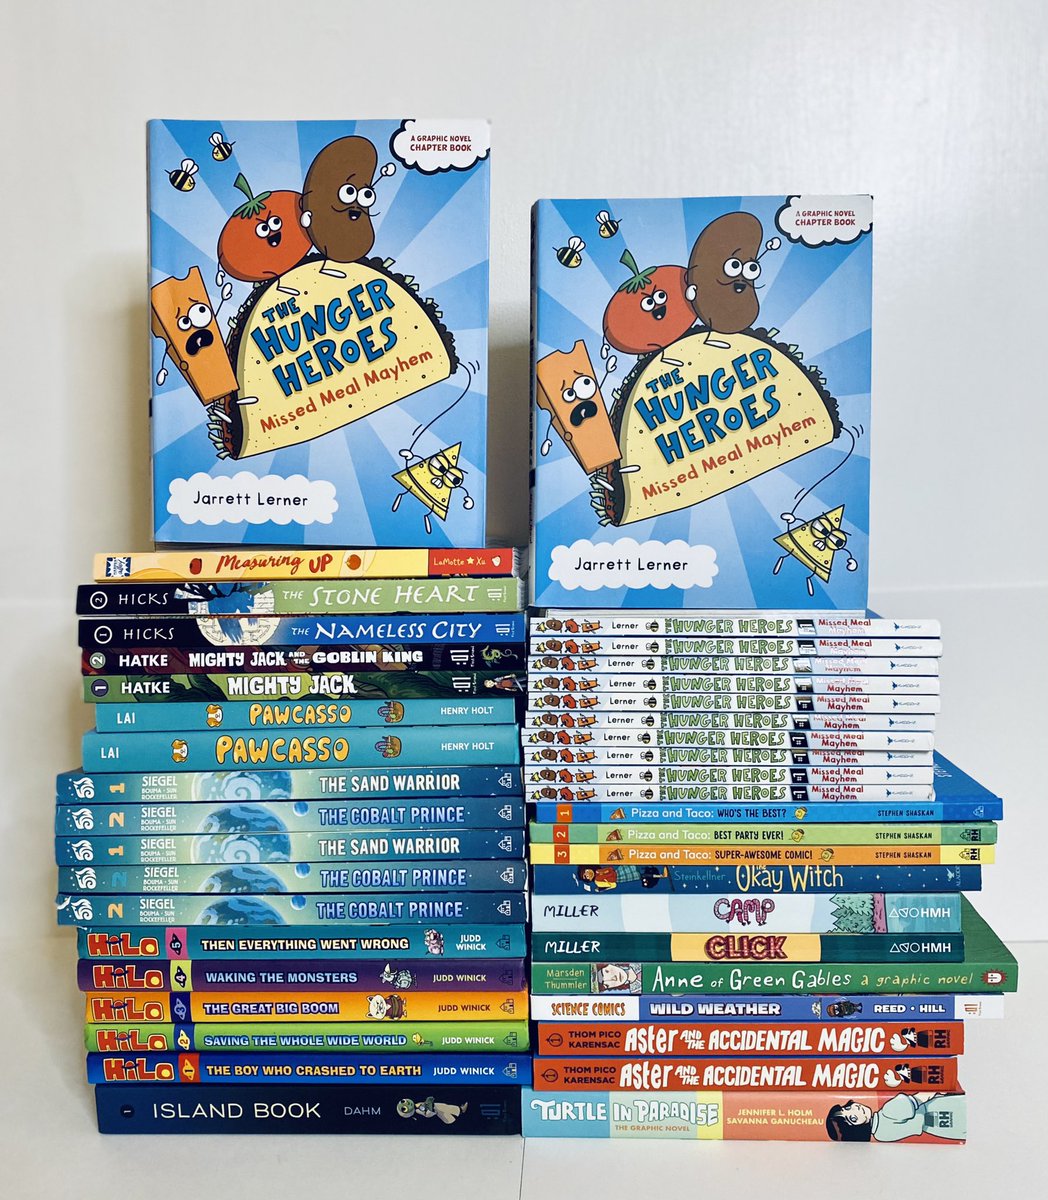 Kids need books for summer reading, and kids love graphic novels — so here’s a GN giveaway, including a dozen copies of my first Hunger Heroes graphic novel!

If you can get these books into kids’ hands, RT this tweet and follow me to enter to win them.

Bonus entry: tag a pal!